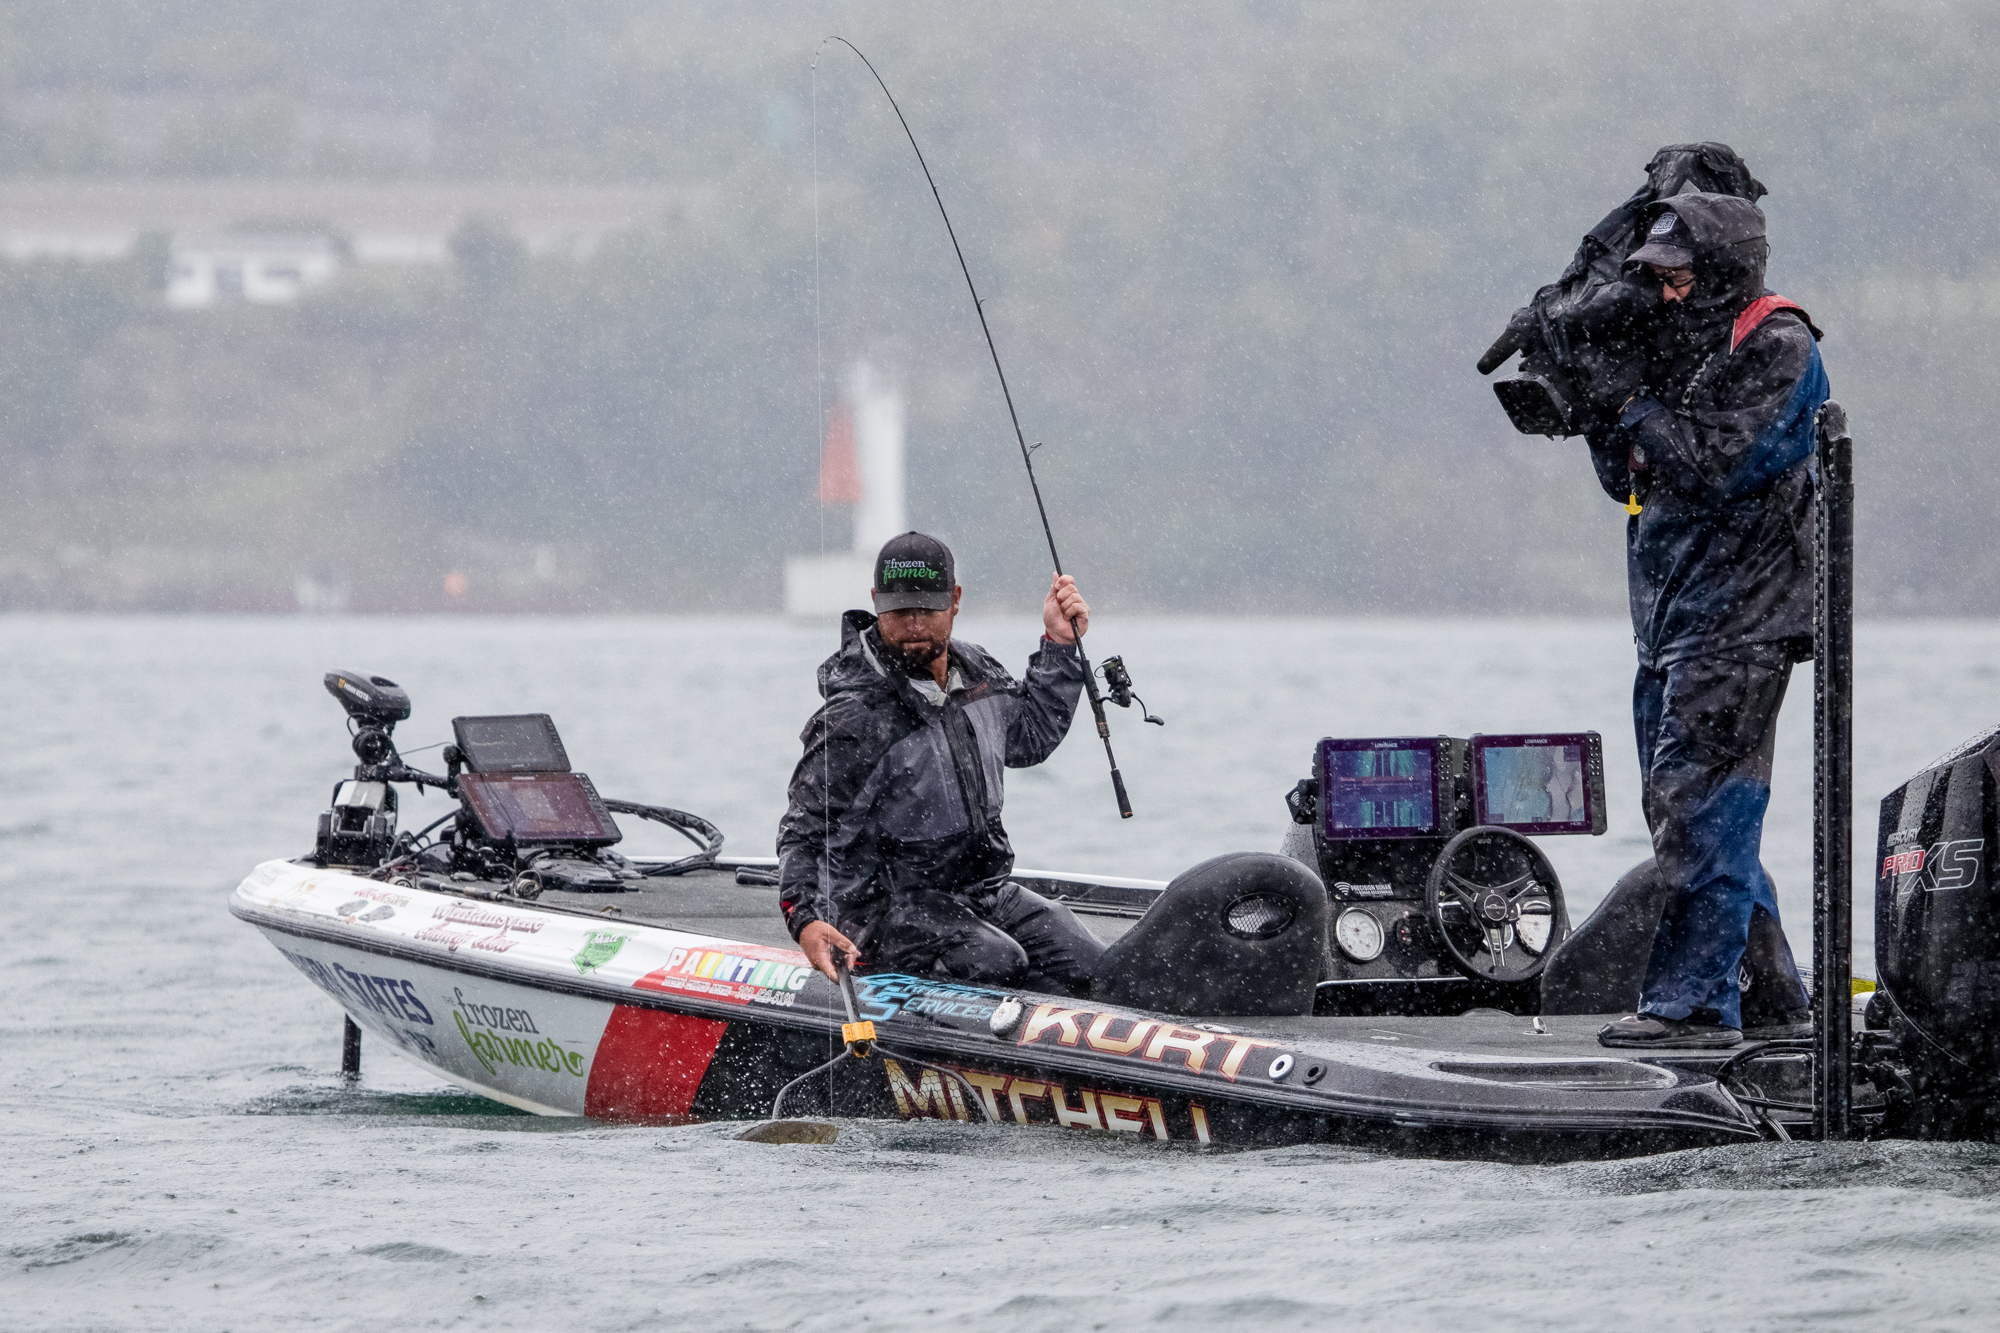 Panzironi sets the pace at the Harris Chain with 28-1 - Major League Fishing